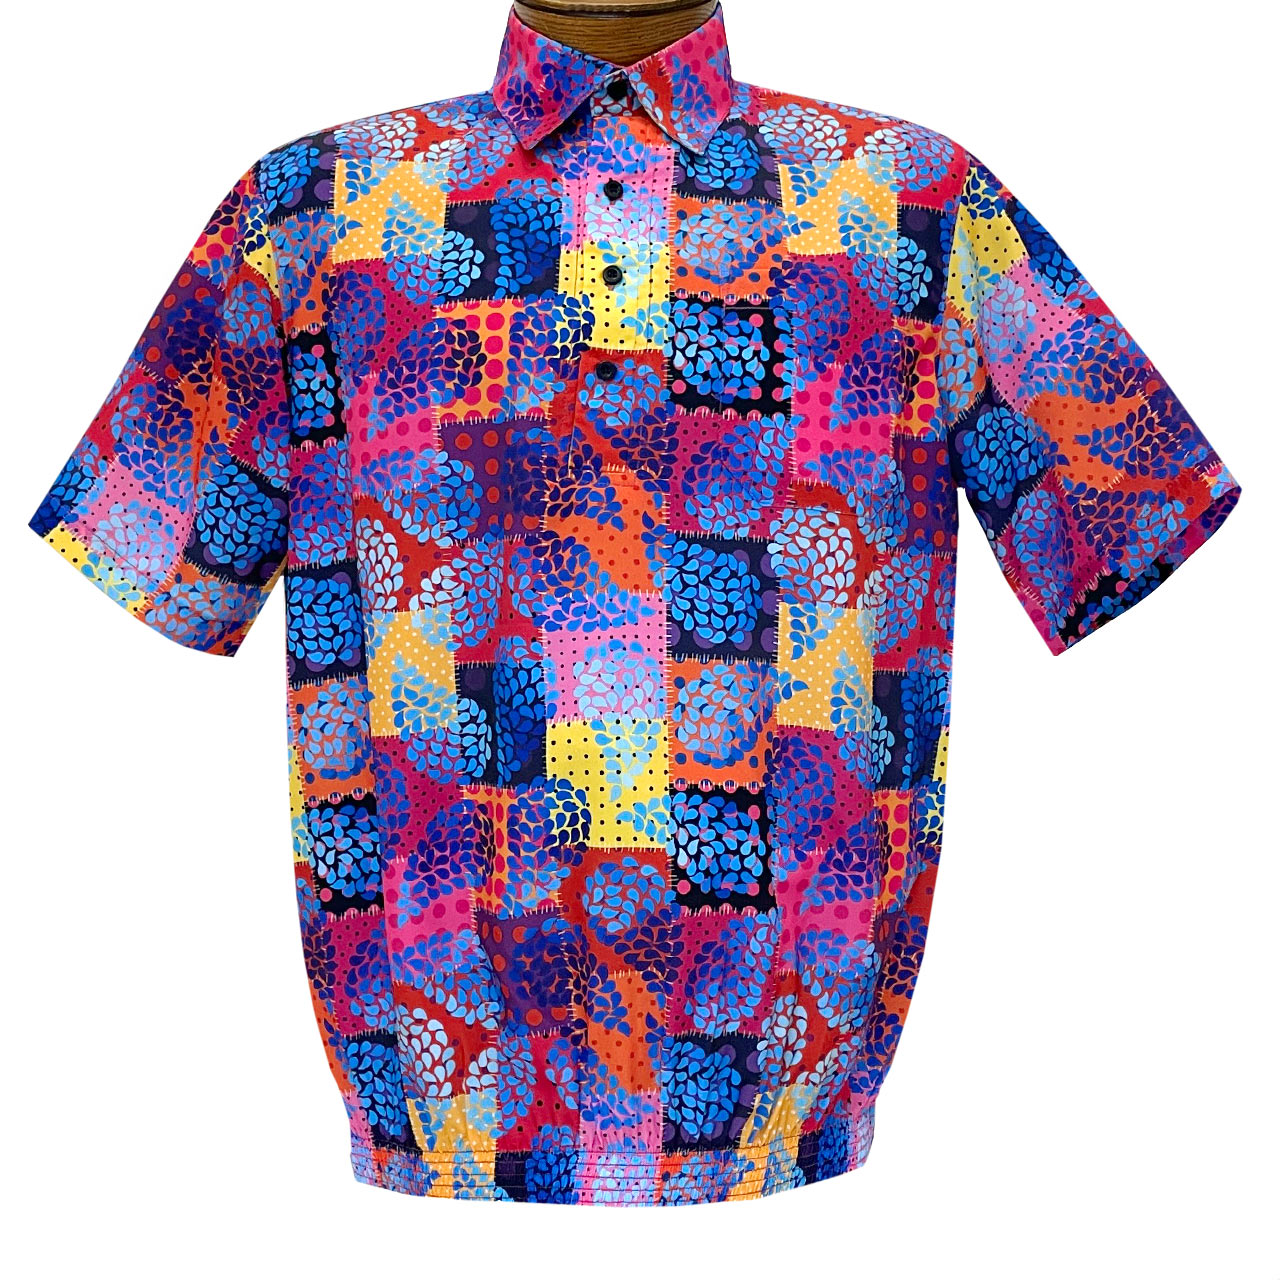 Men's Banded Bottom Short Sleeve Microfiber Shirt By Bassiri, Our Exclusive Handpicked Designs #63995 Multi